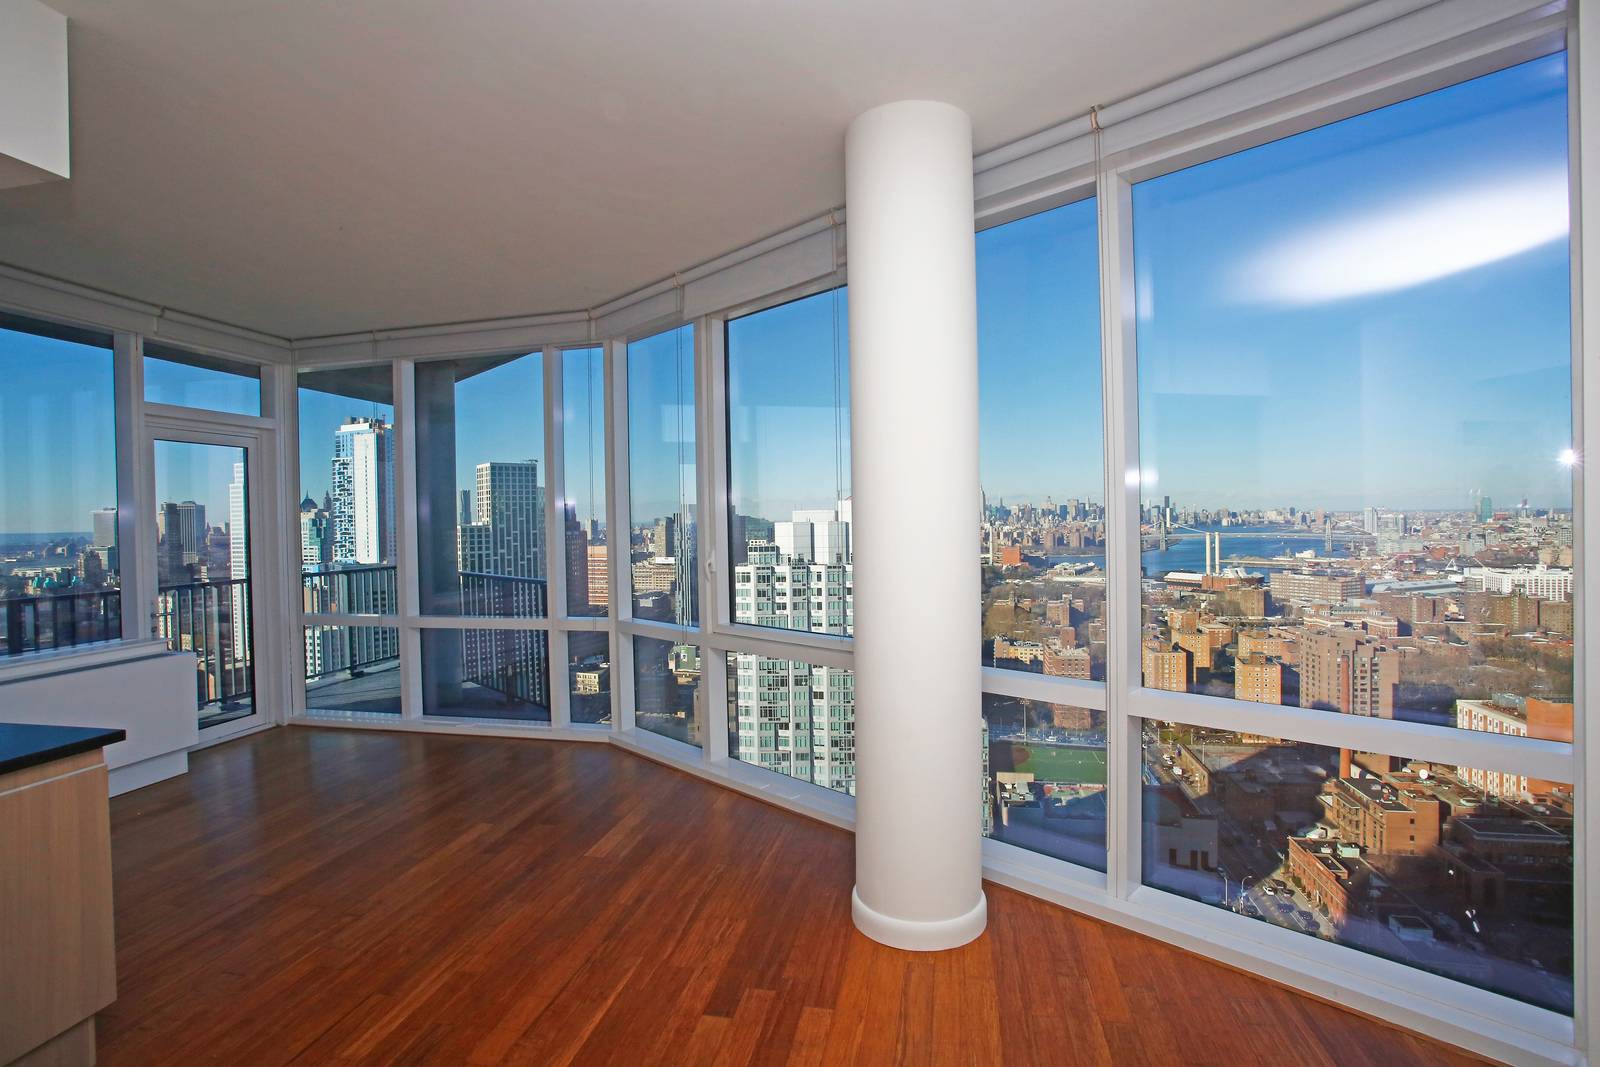 CORNER LUXURY 1BR w/ FLOOR TO CEILING WINDOWS! KING SIZE BEDROOM, MANHATTAN & EAST RIVER VIEWS, OVER 10k SF OF AMENITIES & MORE - 1 MONTH FREE & NO FEE